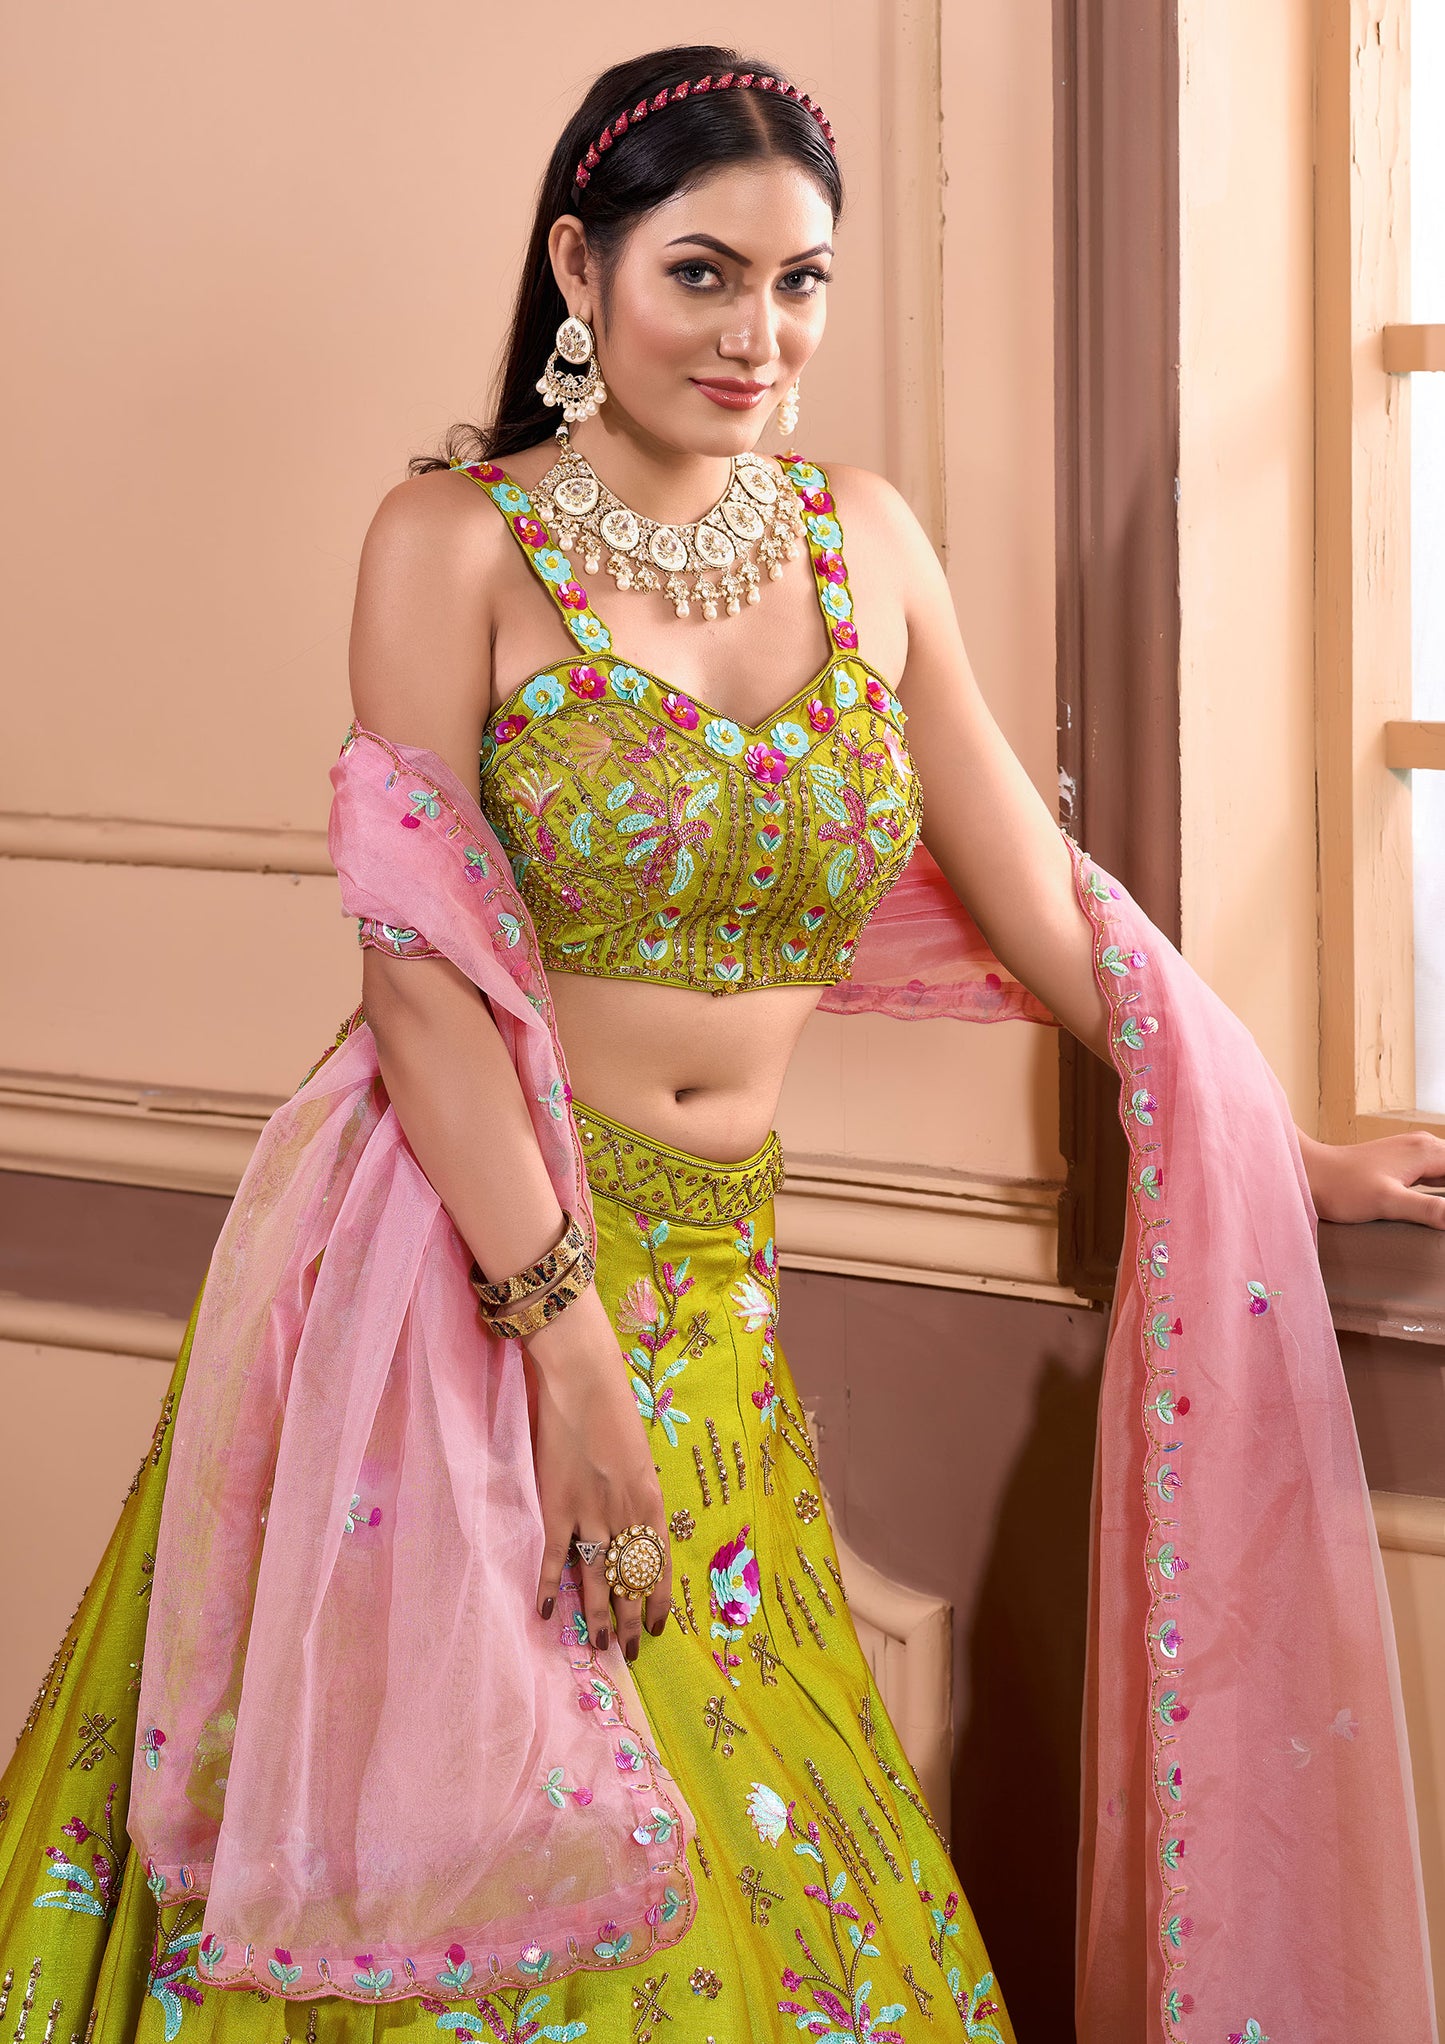 A stunning Indian woman wearing a green lehenga, showcasing the elegance of traditional attire.